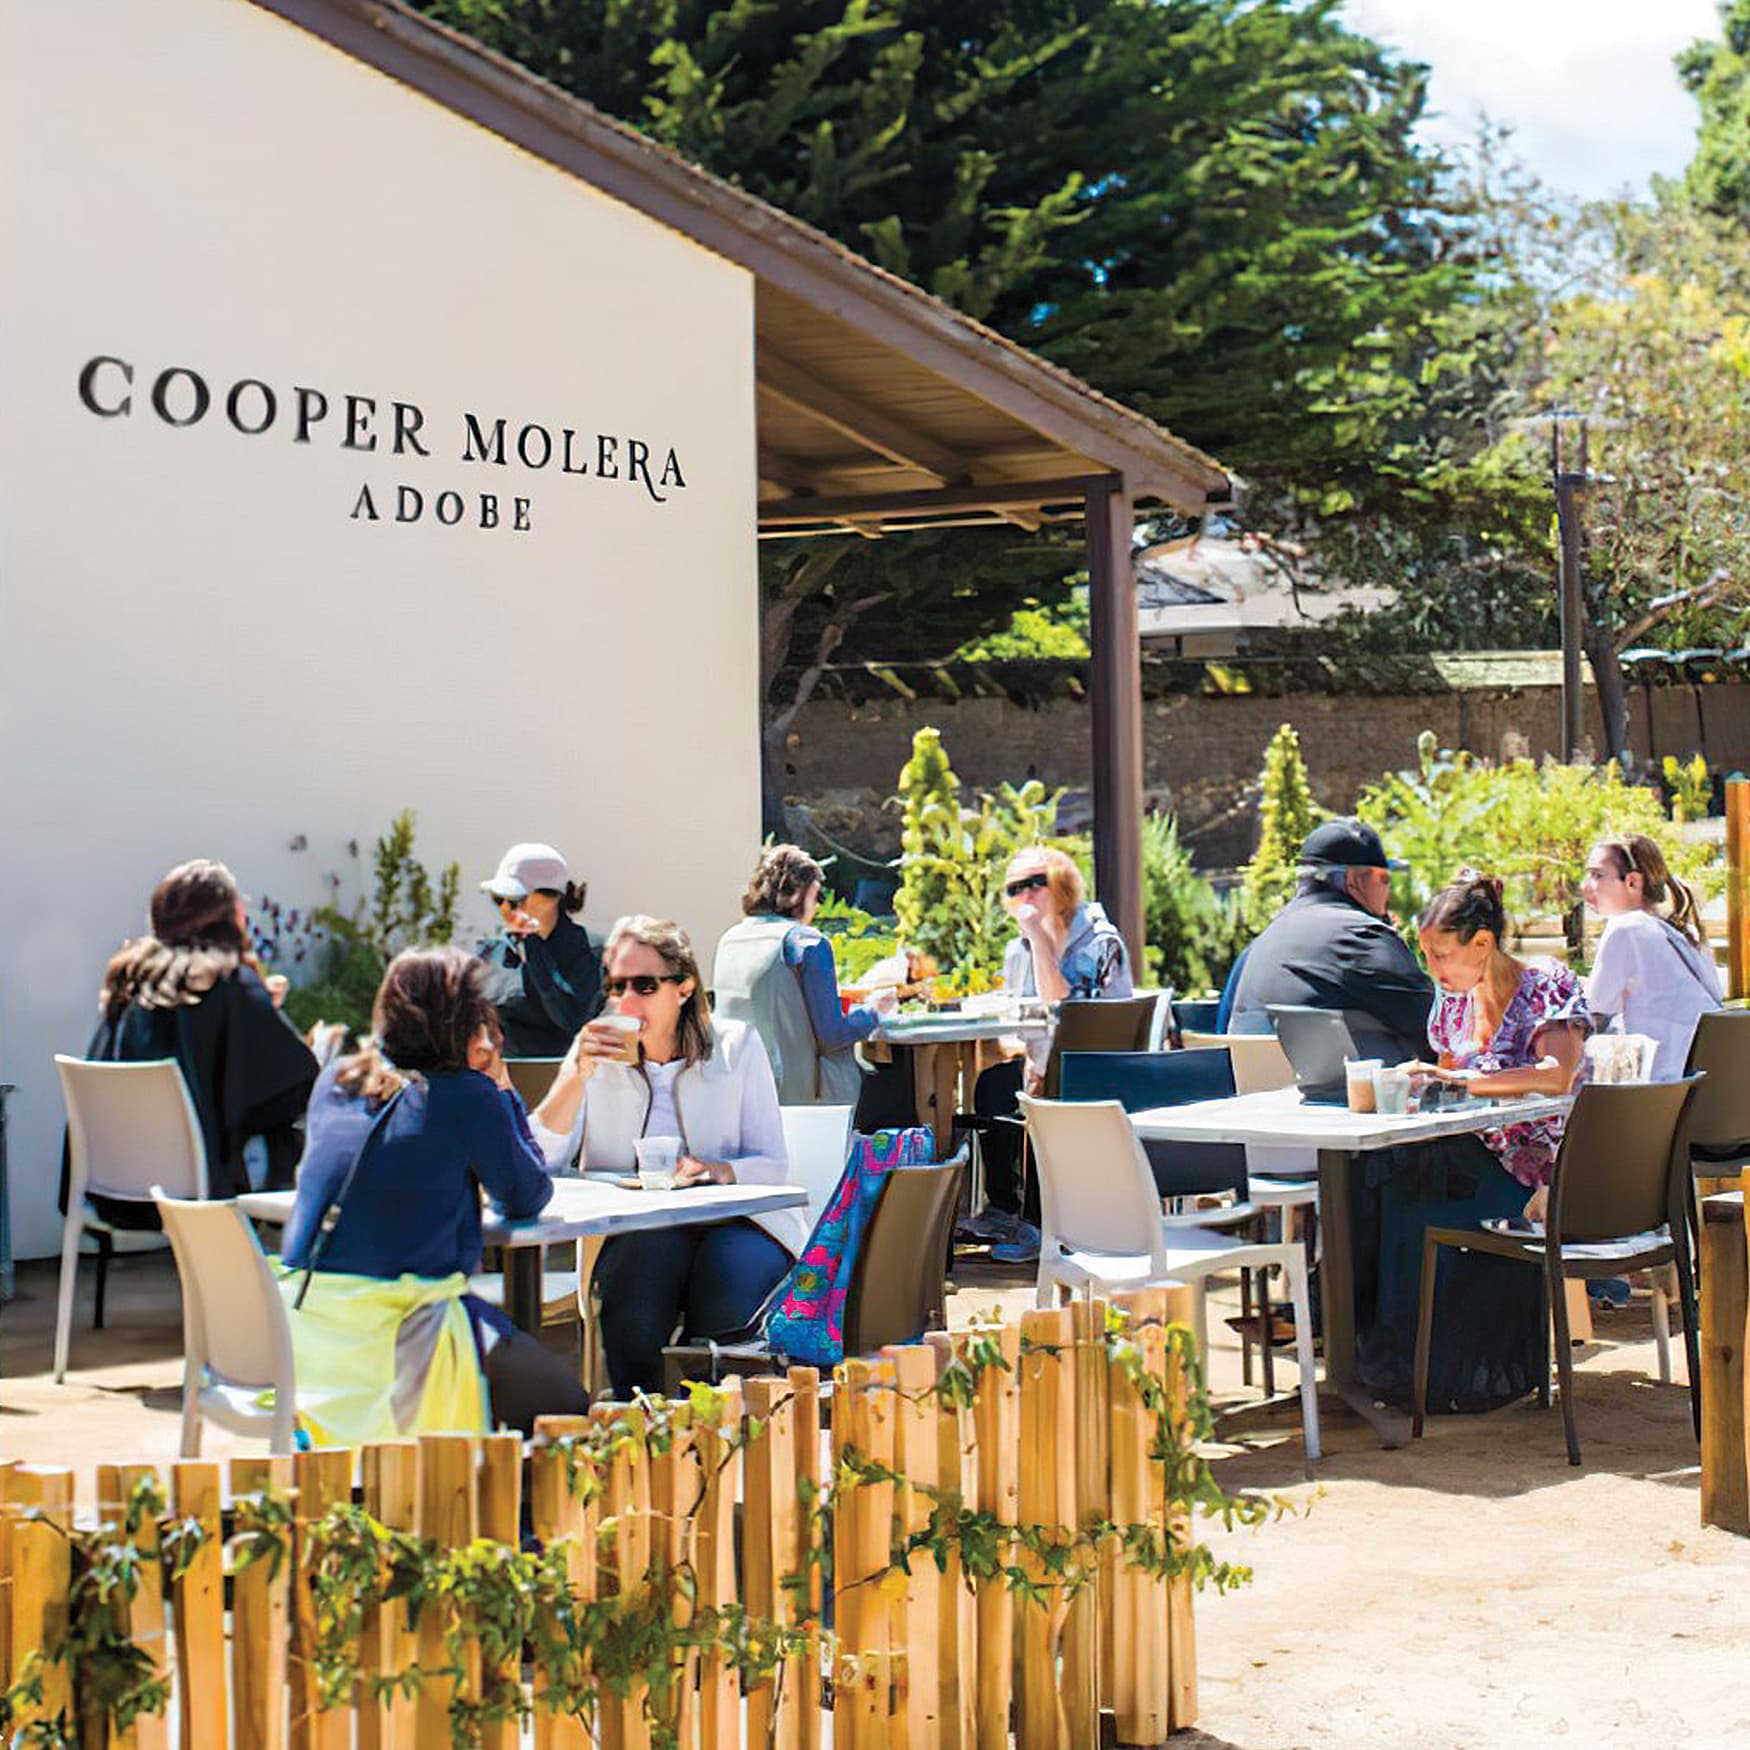 RSM Design painted storefront identity and brand for Cooper Molera Adobe, in Monterey, California,  is a historic property jointly managed with the National Trust for Historic Preservation